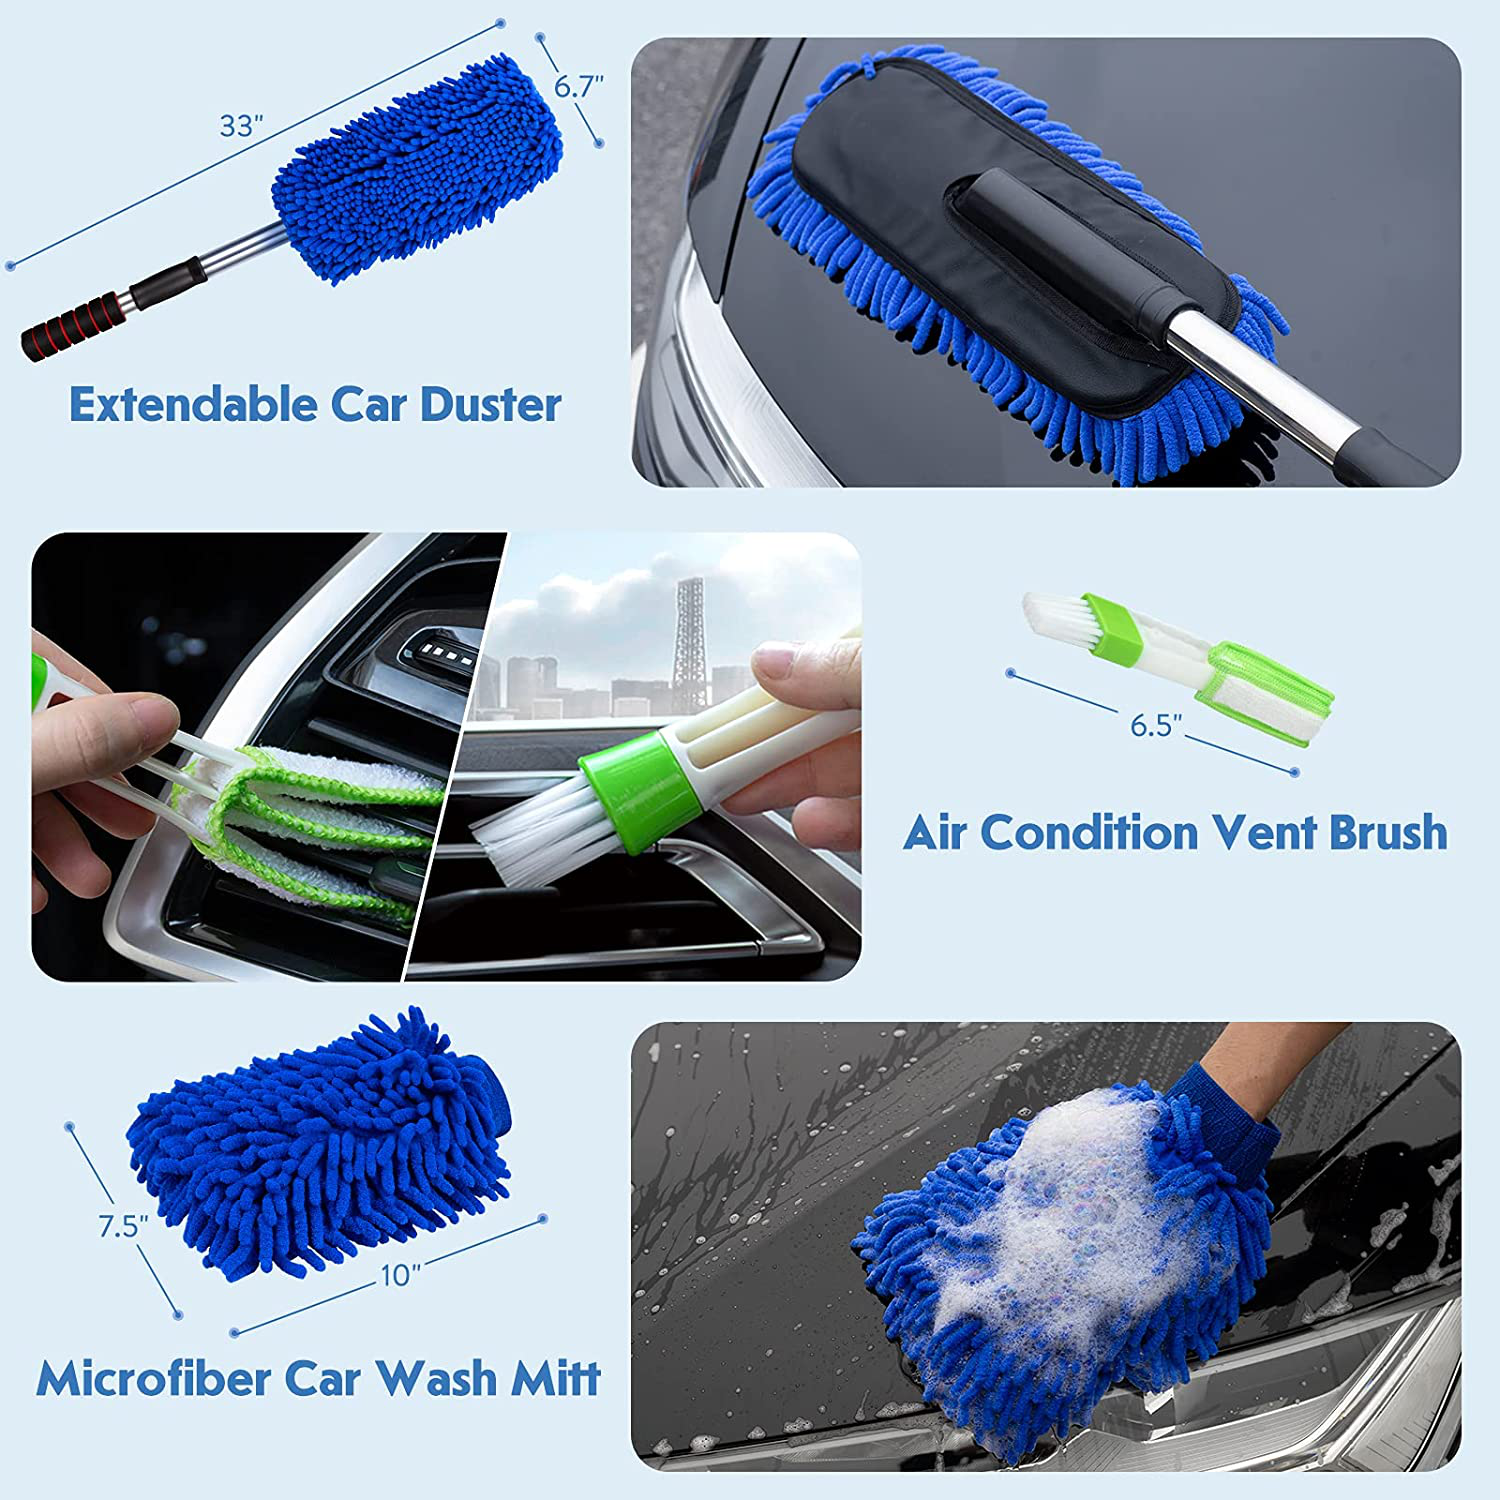 Car Wash Kit Cleaning Tools with Bucket Complete Detailing Supplies, 12pcs Best Car Washing Kits,Collapsible Bucket Extendable Duster Wash Mitt Towel Tire Brush Window Scraper Wax Applicator